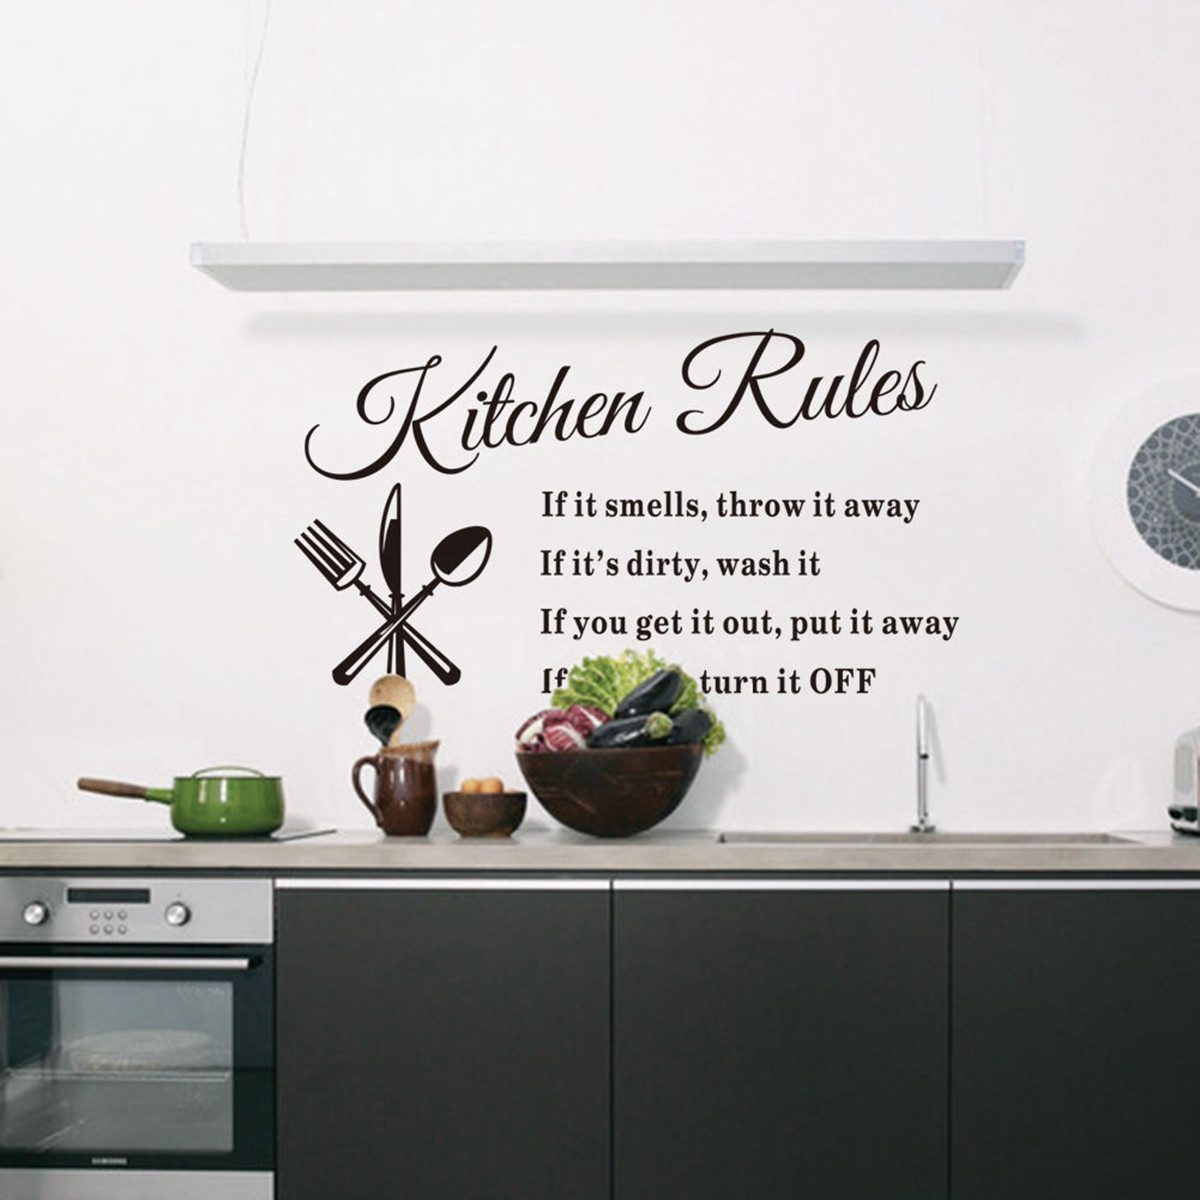 Kitchen Rules Wall Decor
 DIY Removable Art Vinyl Quote Wall Sticker Decal Home